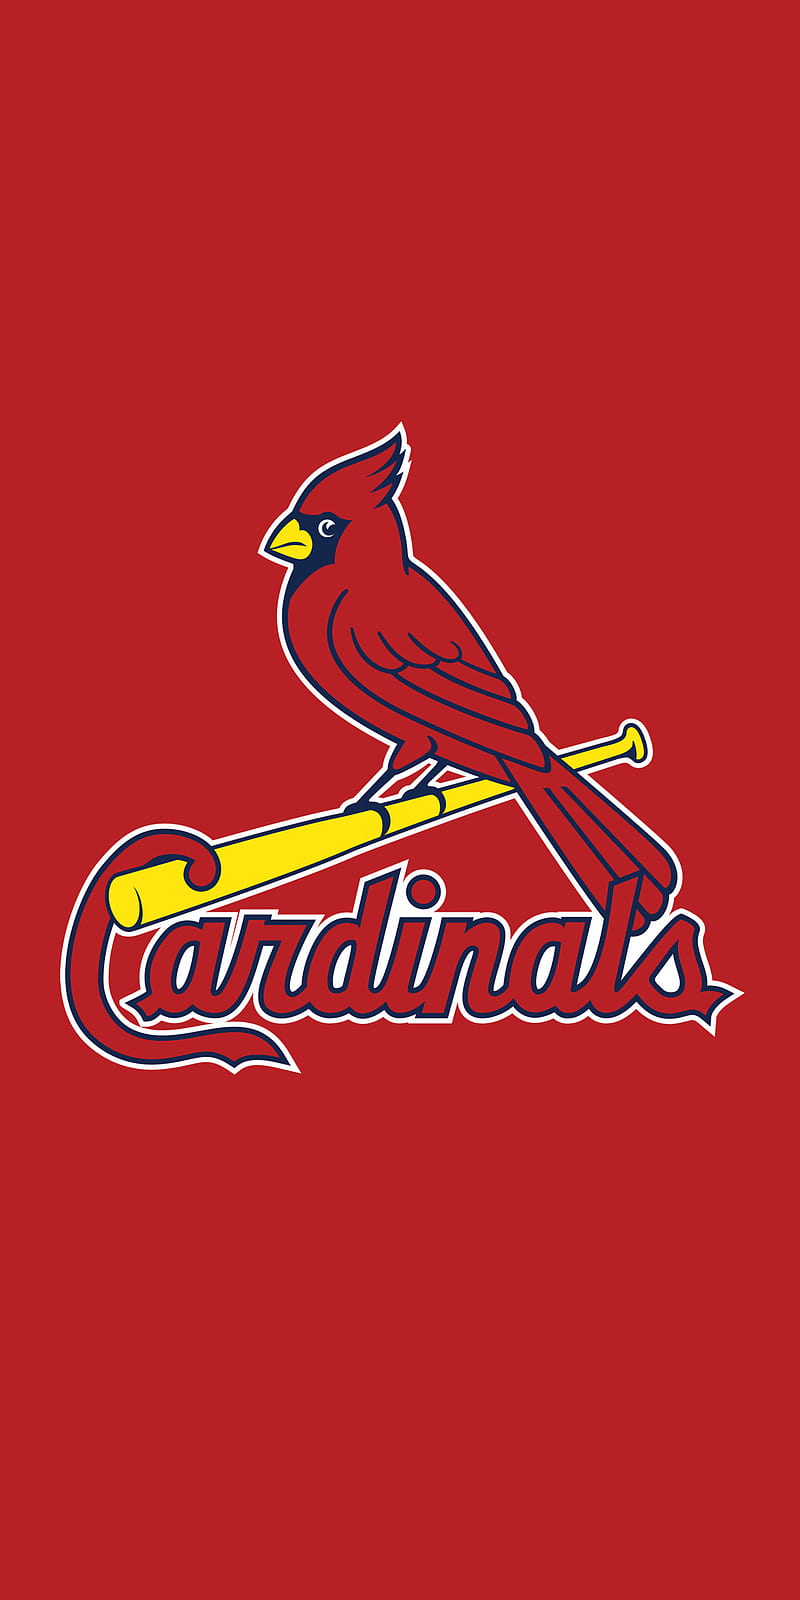 Made a wallpaper set for the Cardinals for 2022 based on the scoreboard  player intro graphics Desktop and full size versions linked in comments   rCardinals